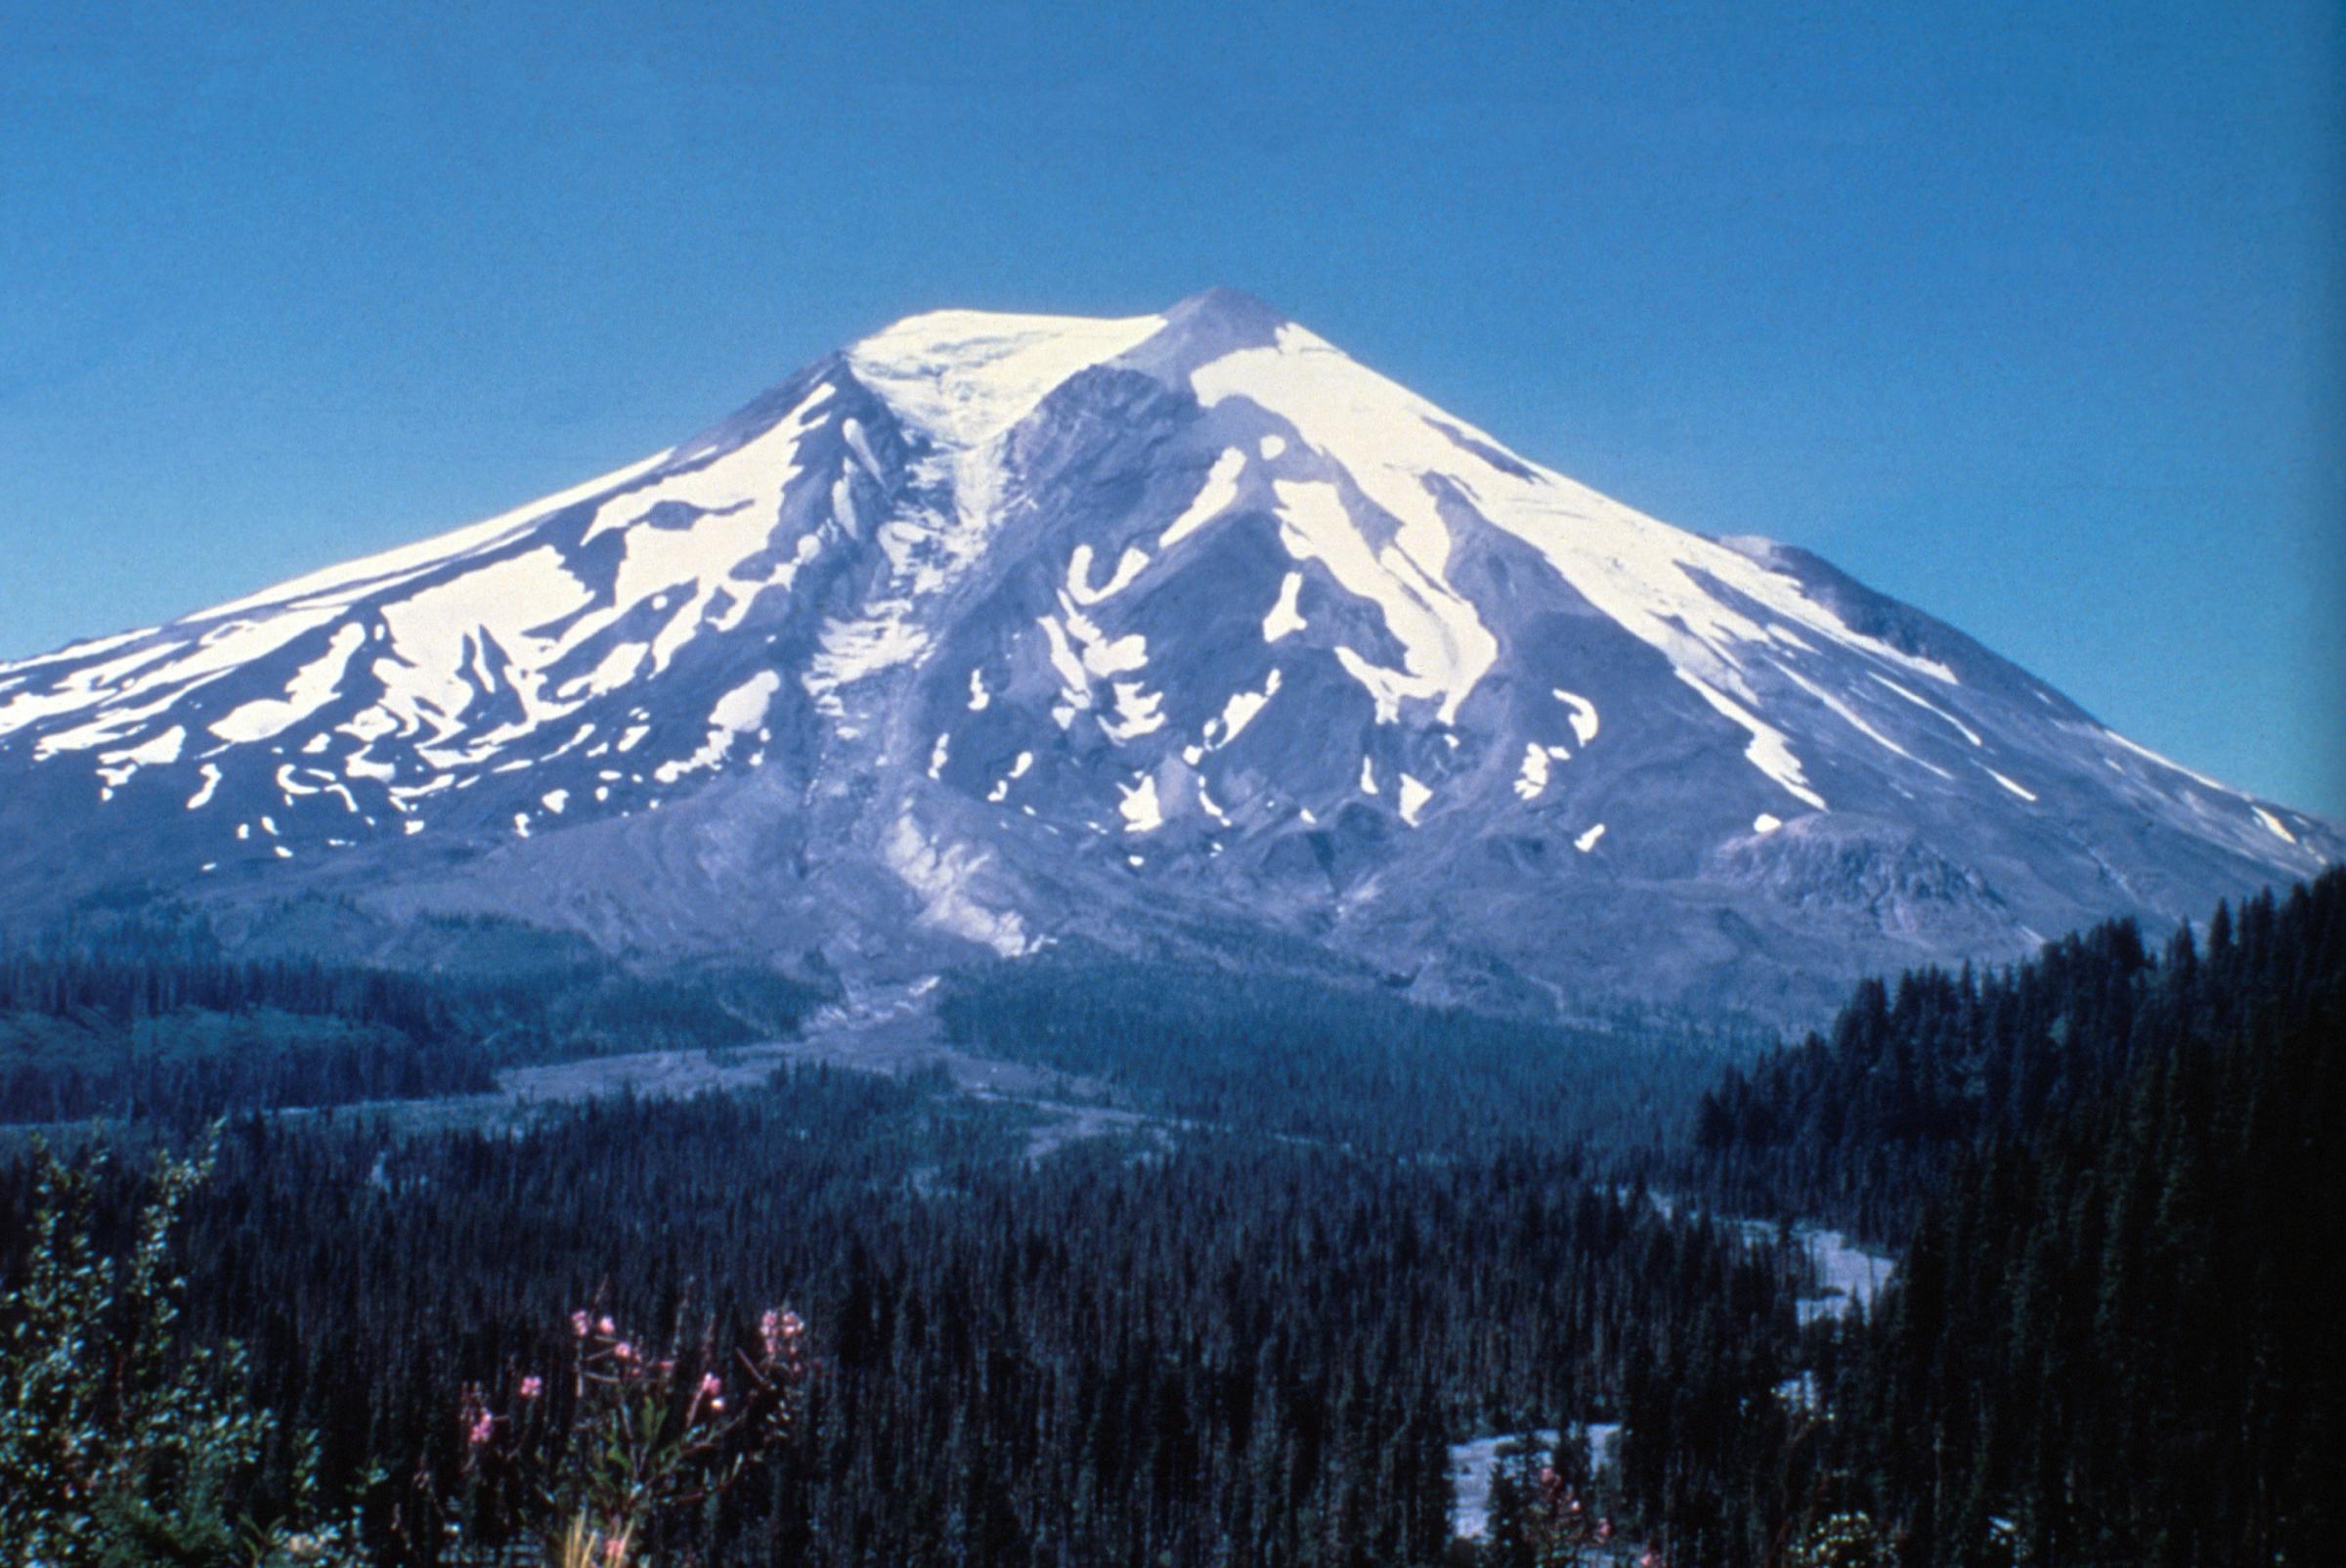 Southeast side of Mount St. Helens, showing Shoestring Glacier. This pre-1980 view of Mount St. Helens shows the volcano's southeast flank and the headwaters of the Muddy River before the May 18th, 1980 eruption. The broad forested area in the foreground i